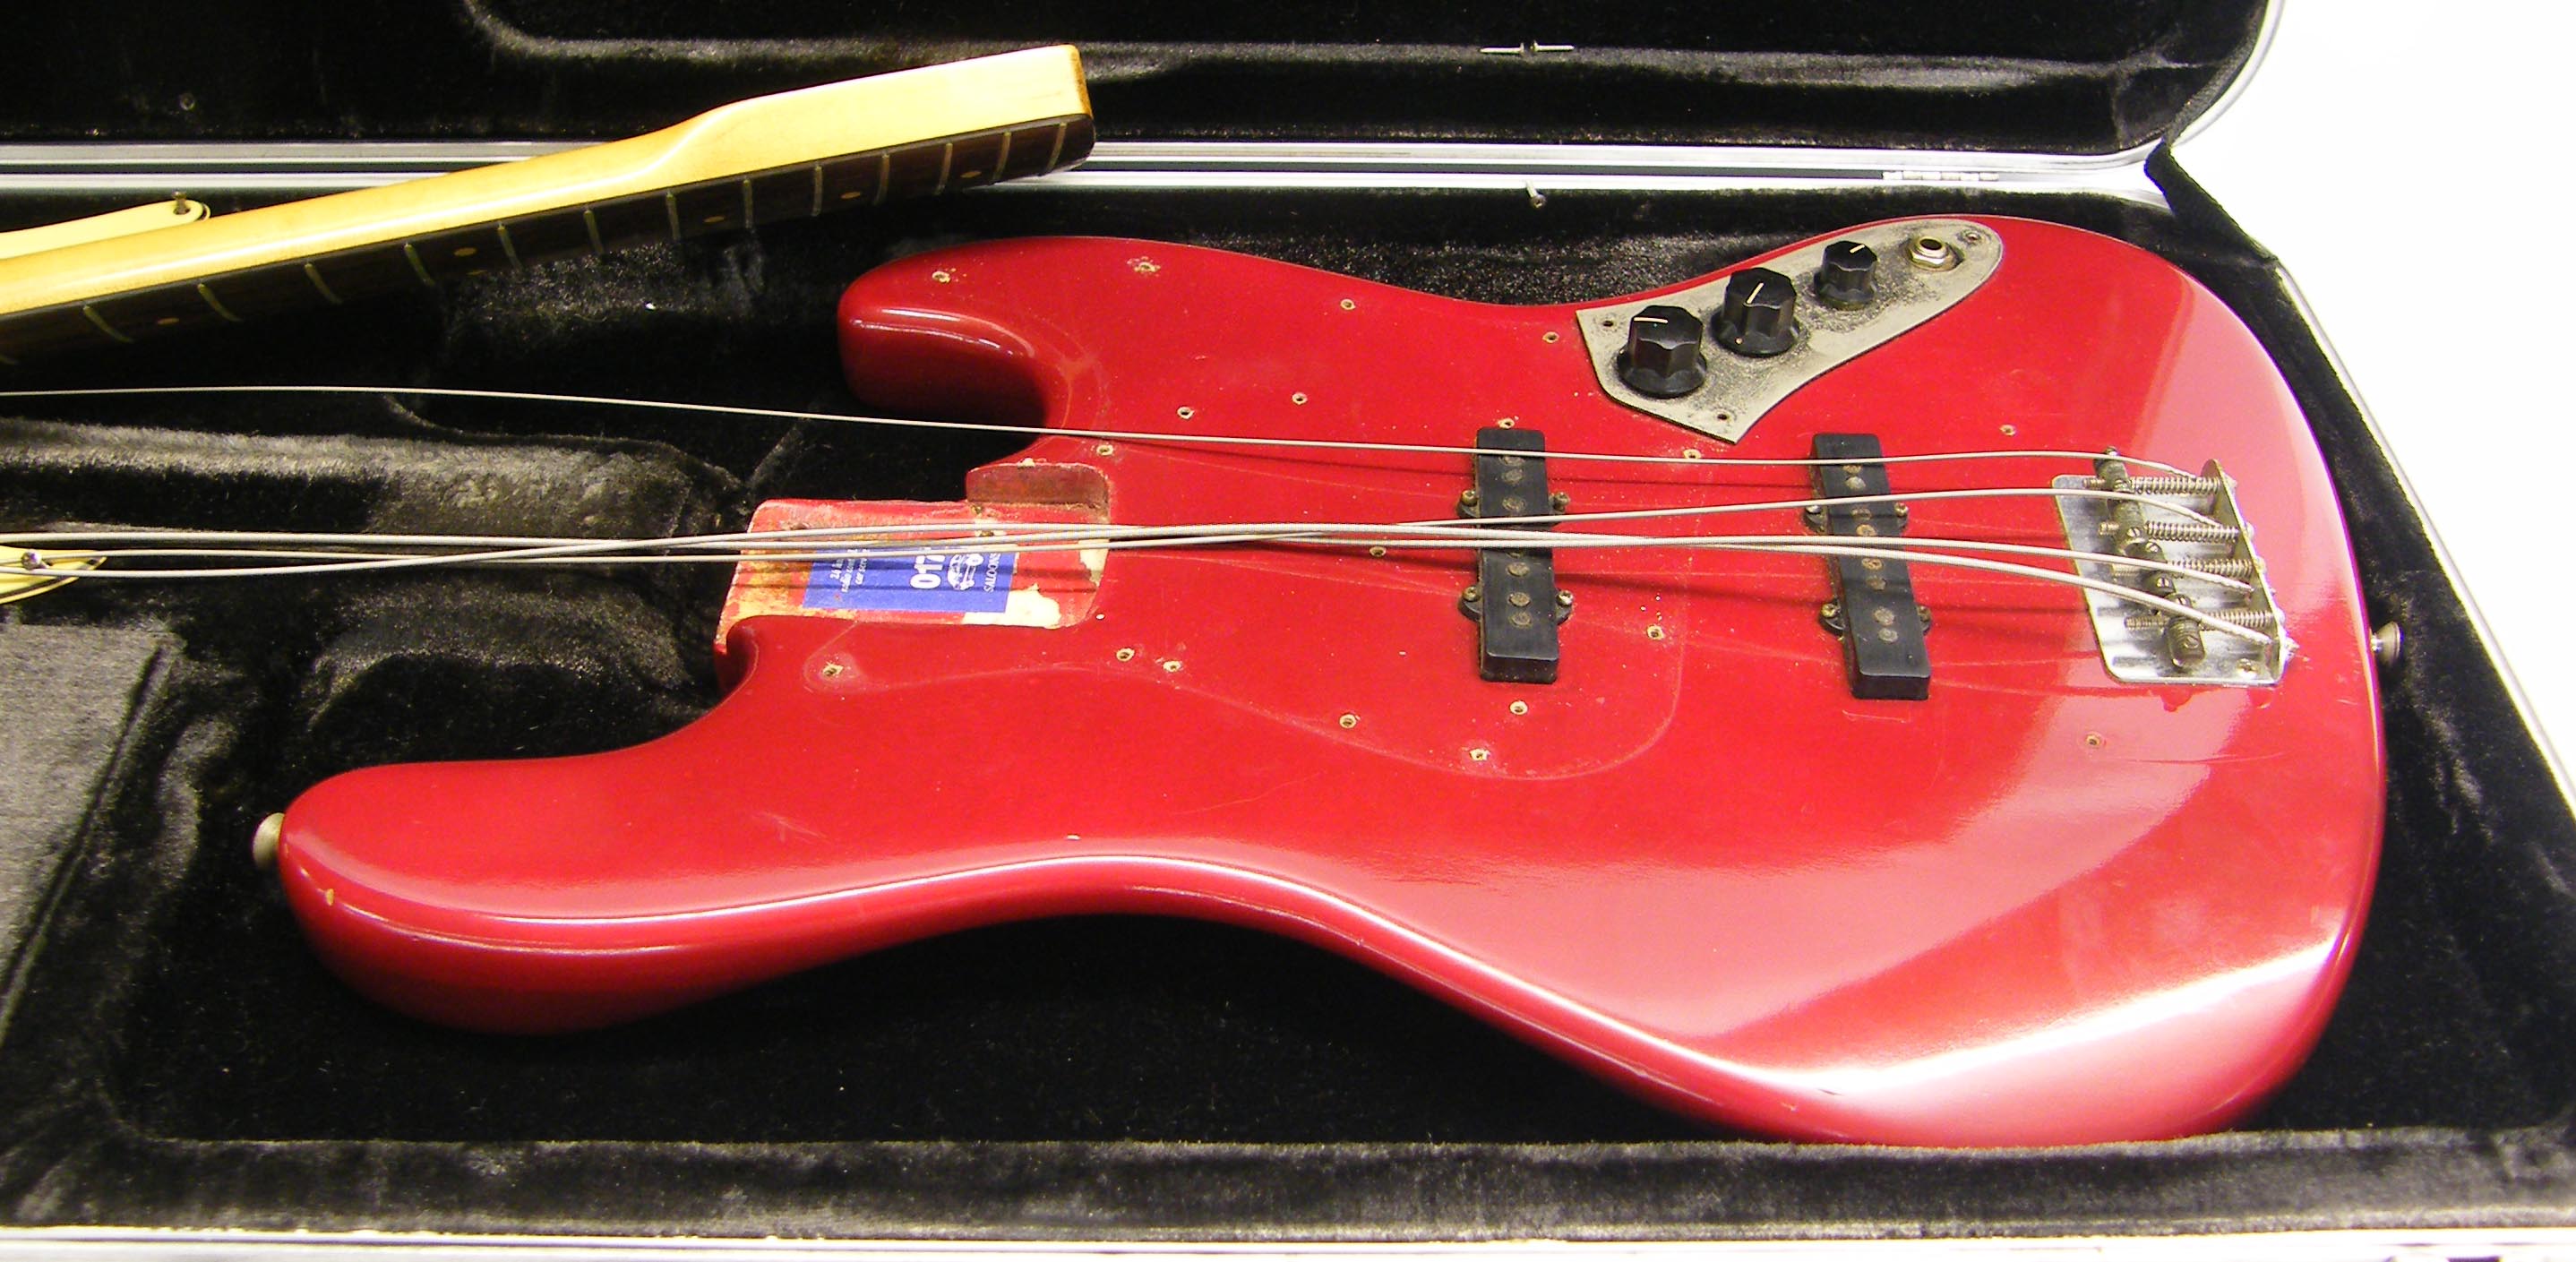 1964 Fender Jazz Bass electric bass guitar, made in USA, ser. no. L21548, red re-finish with various - Image 5 of 9